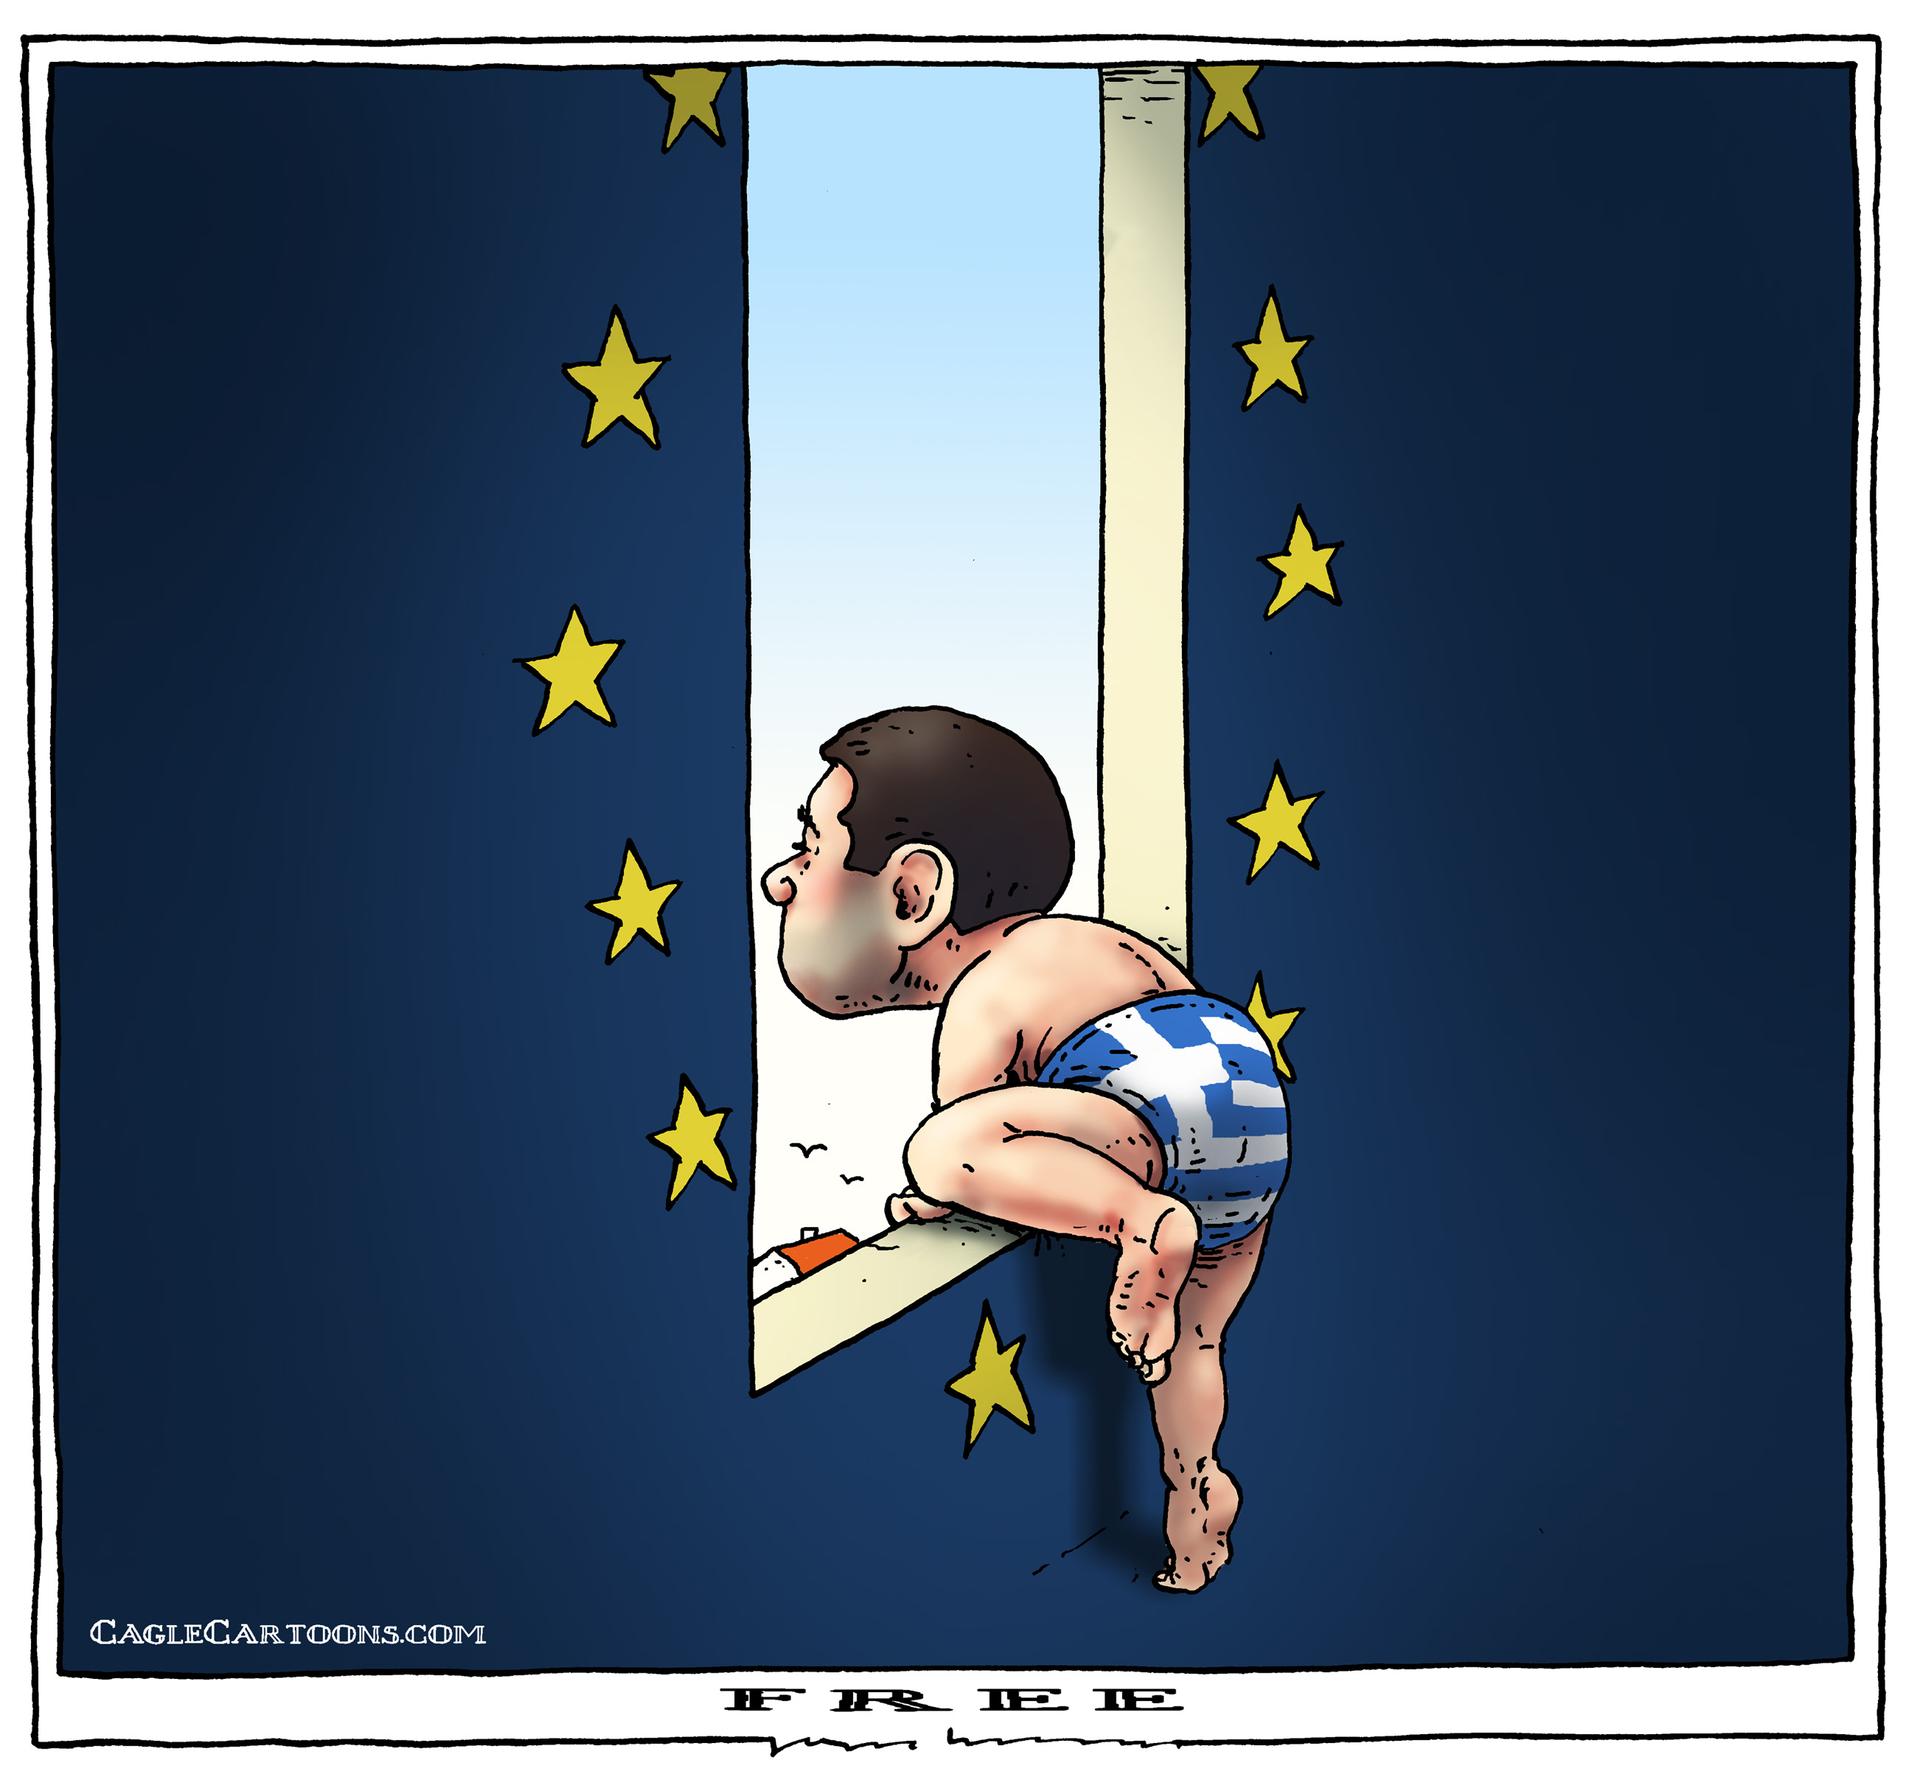 The new, young, leftist Greek Prime Minister Alexis Tsipras wants debt forgiveness and an end to European austerity measures but as you can see, if he exits through the window it's a long way down.   